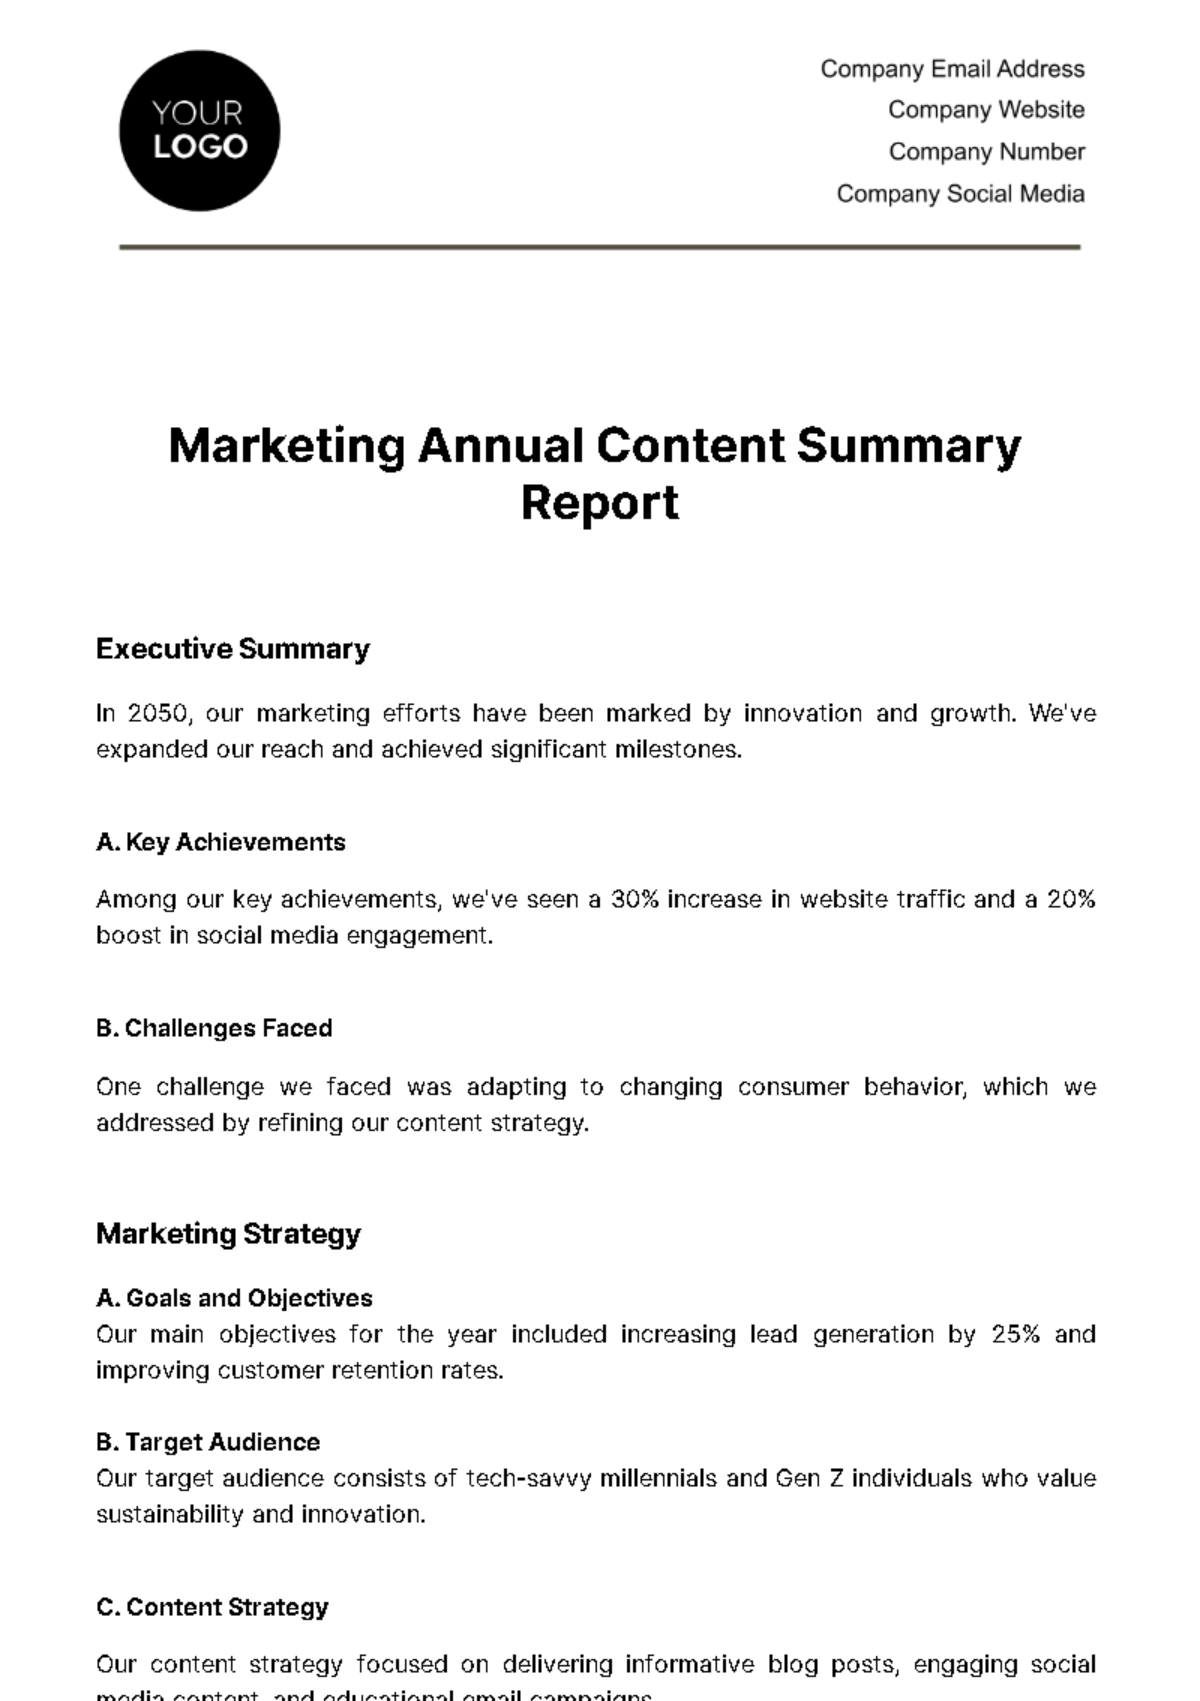 Free Marketing Annual Content Summary Report Template